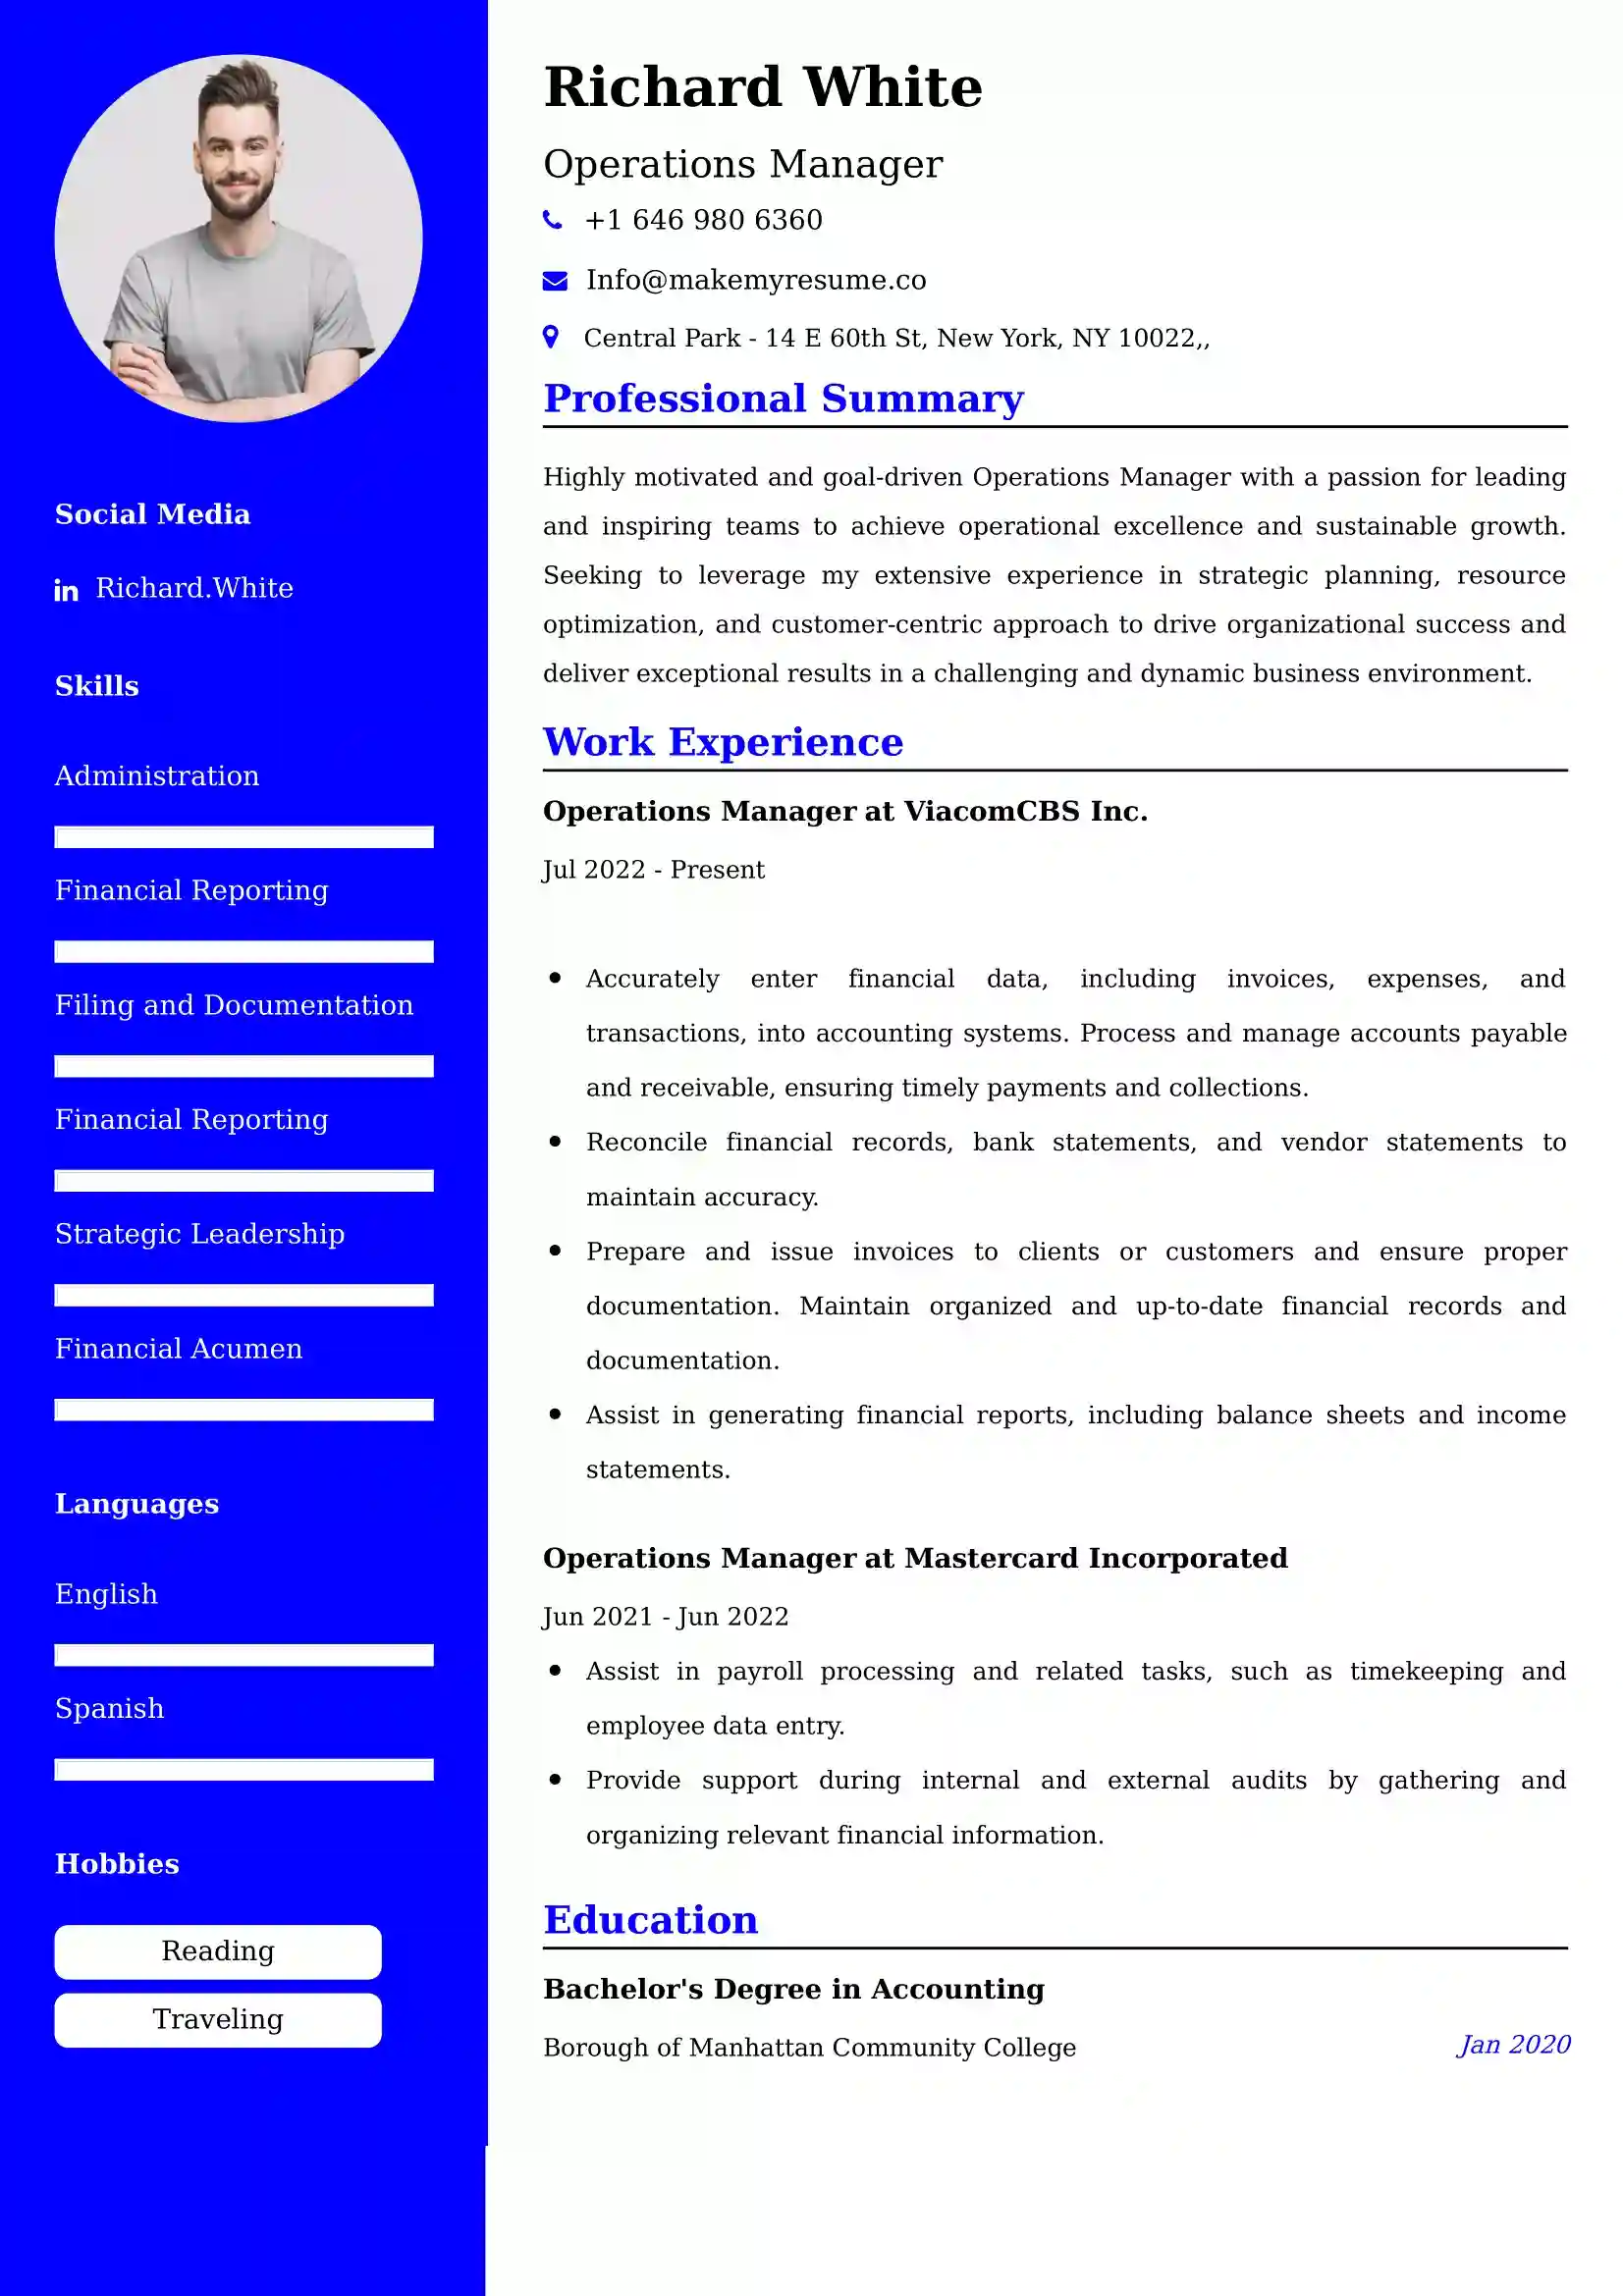 Operations Manager Resume Examples for UAE